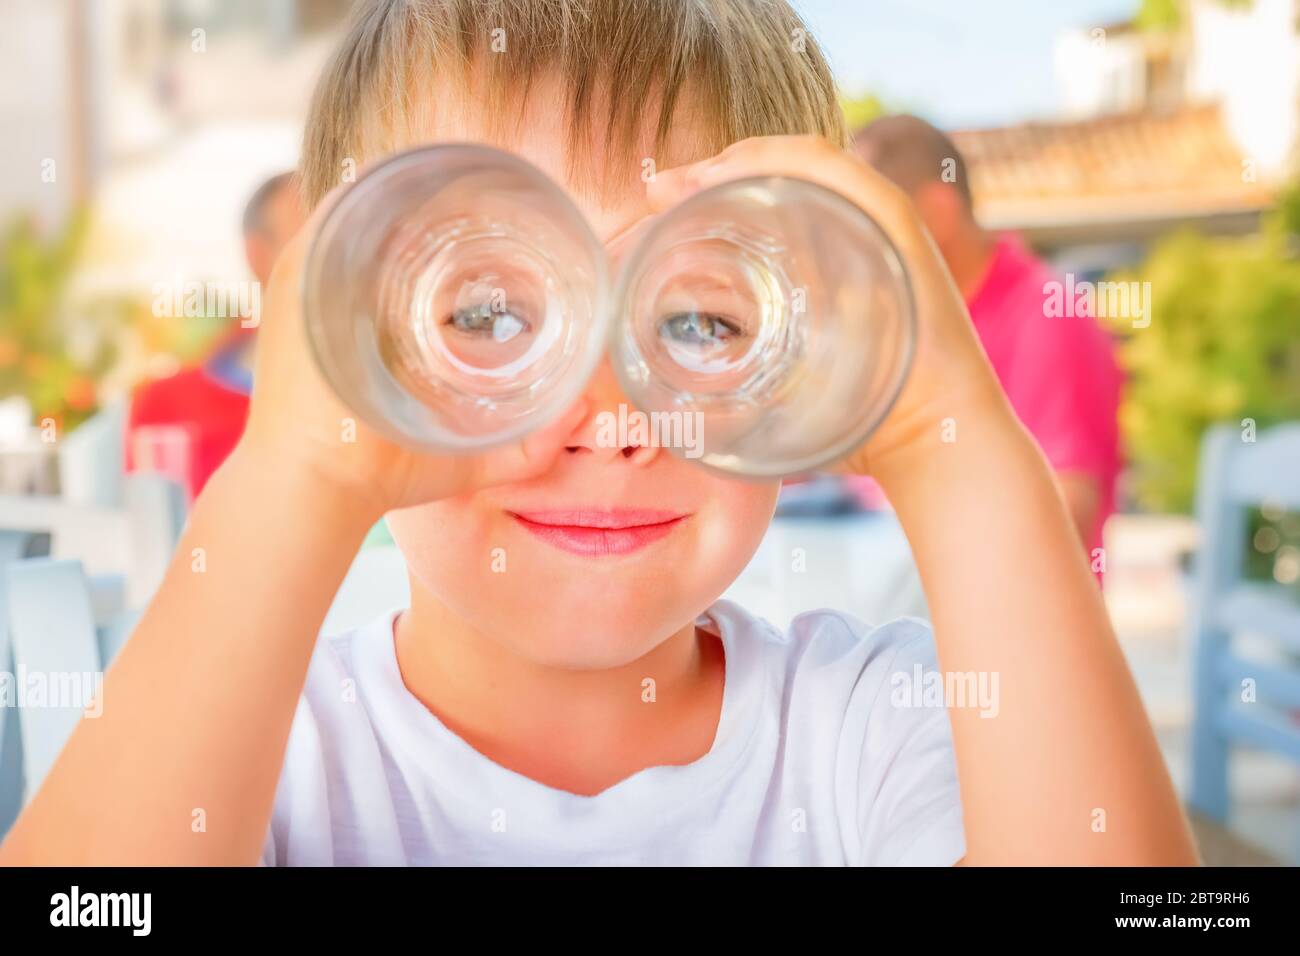 Funny kid looking through two drink glasses as if it were binoculars. Child having fun while waiting for order at cafe, restaurant. Happiness and Stock Photo